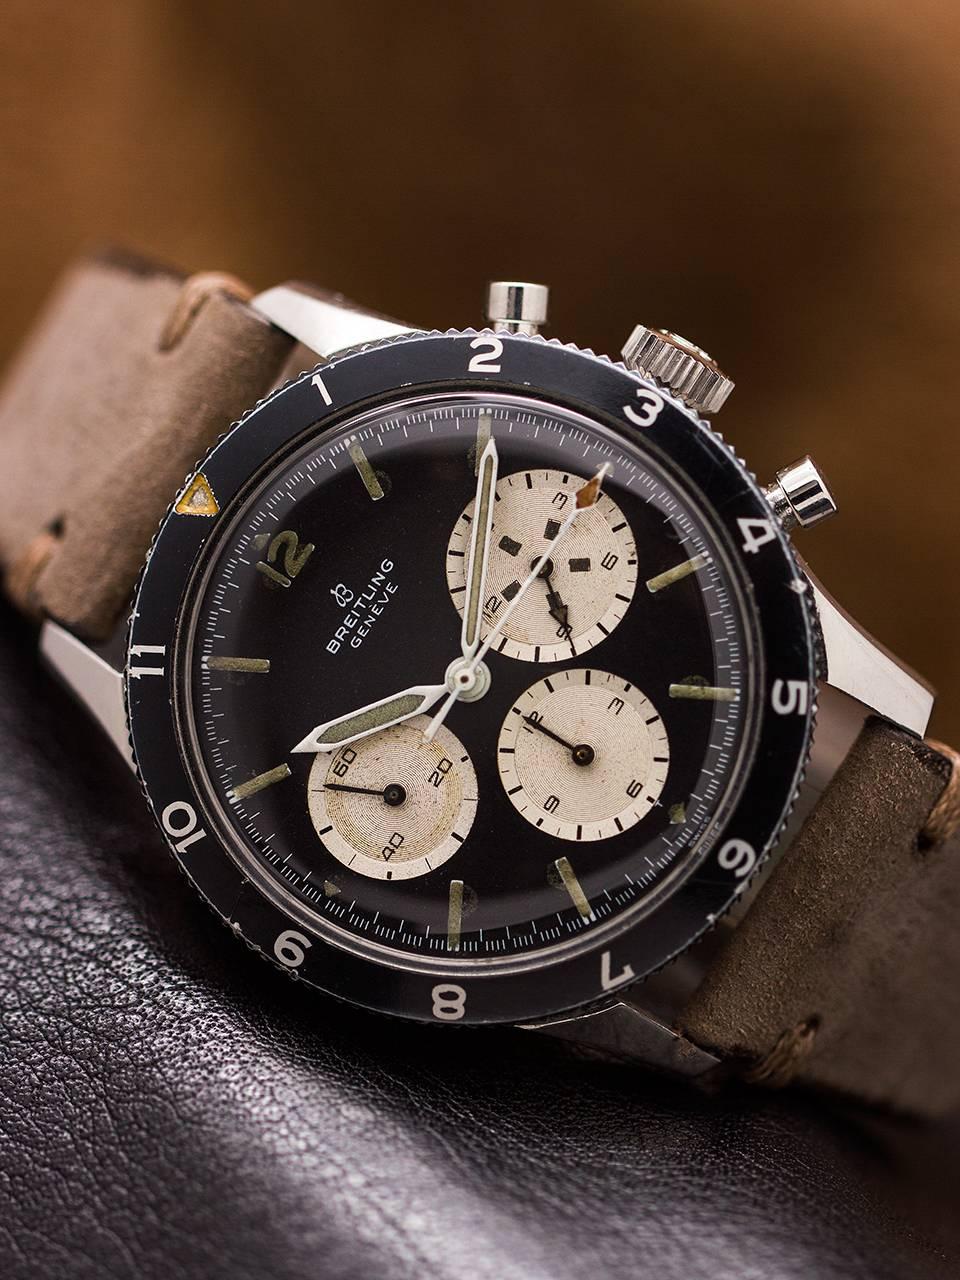 Great condition example vintage Breitling Co-Pilot ref 765 CP case serial # 1.14 million circa 1967. Featuring 41mm diameter case with screw down case back, round pushers, signed Breitling crown, beautiful condition original dial. This is the